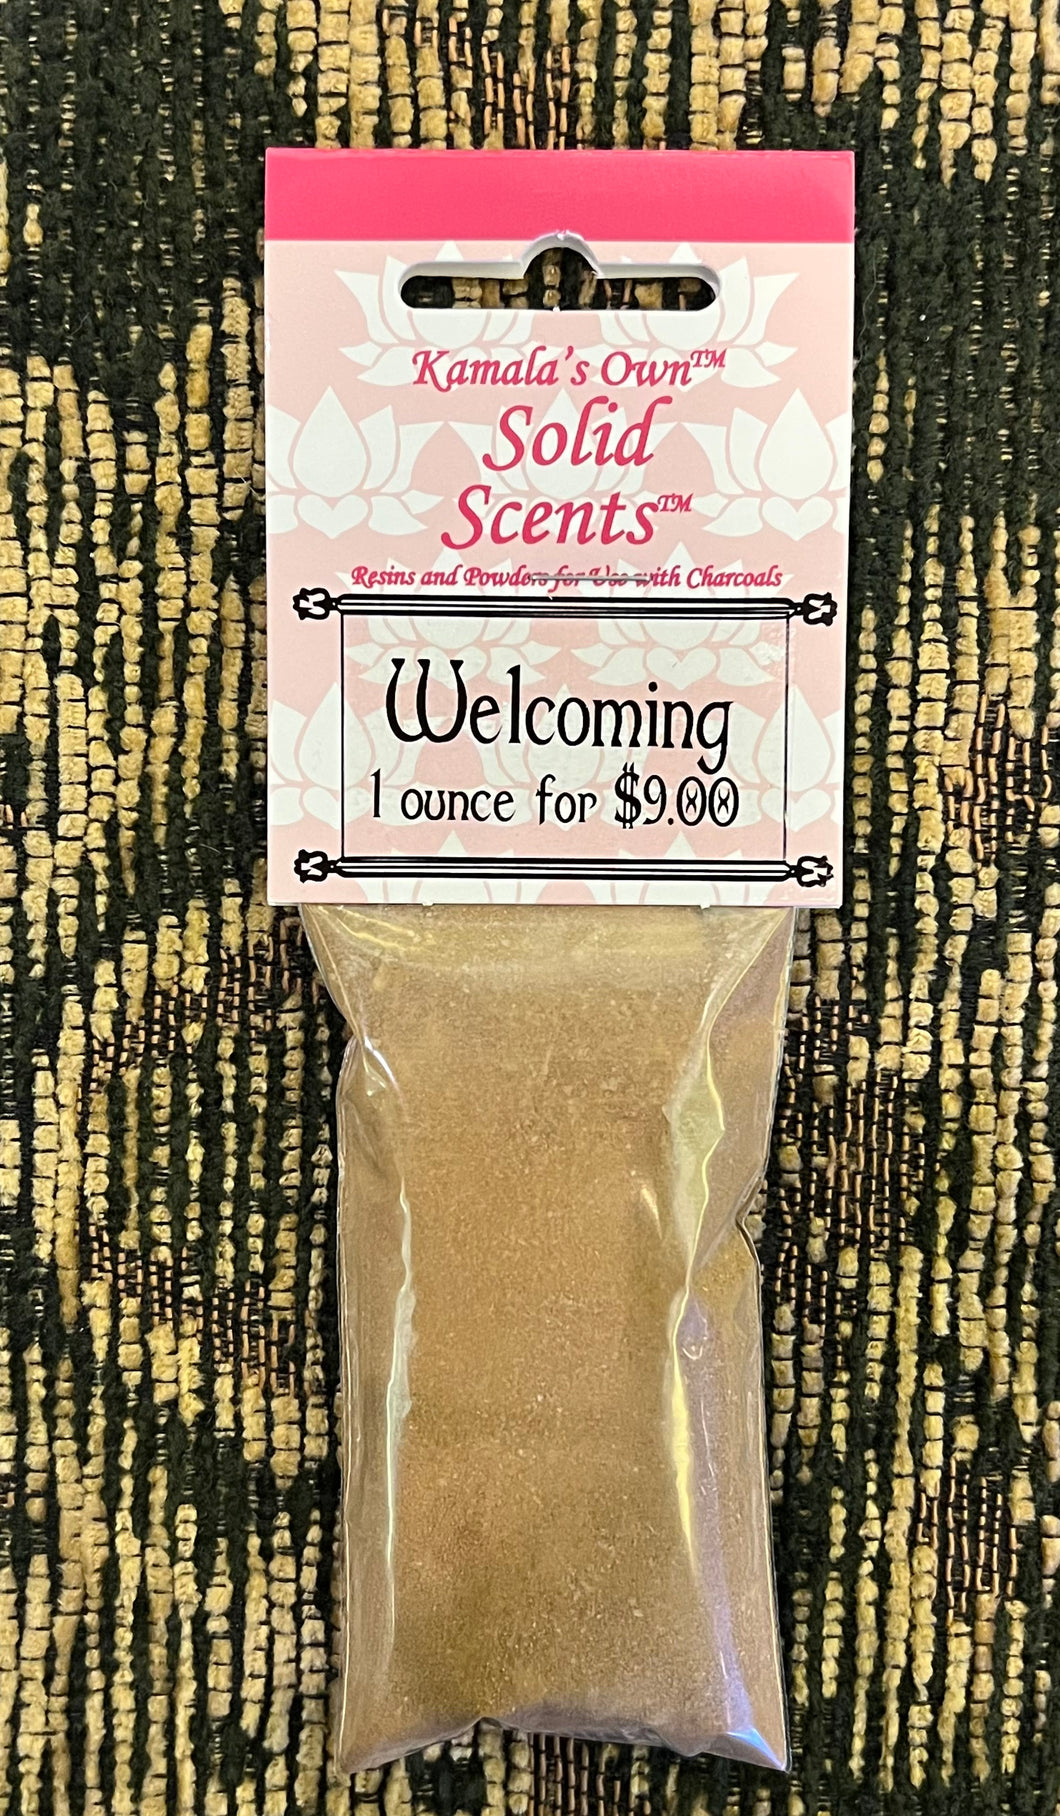 Welcoming powdered incense